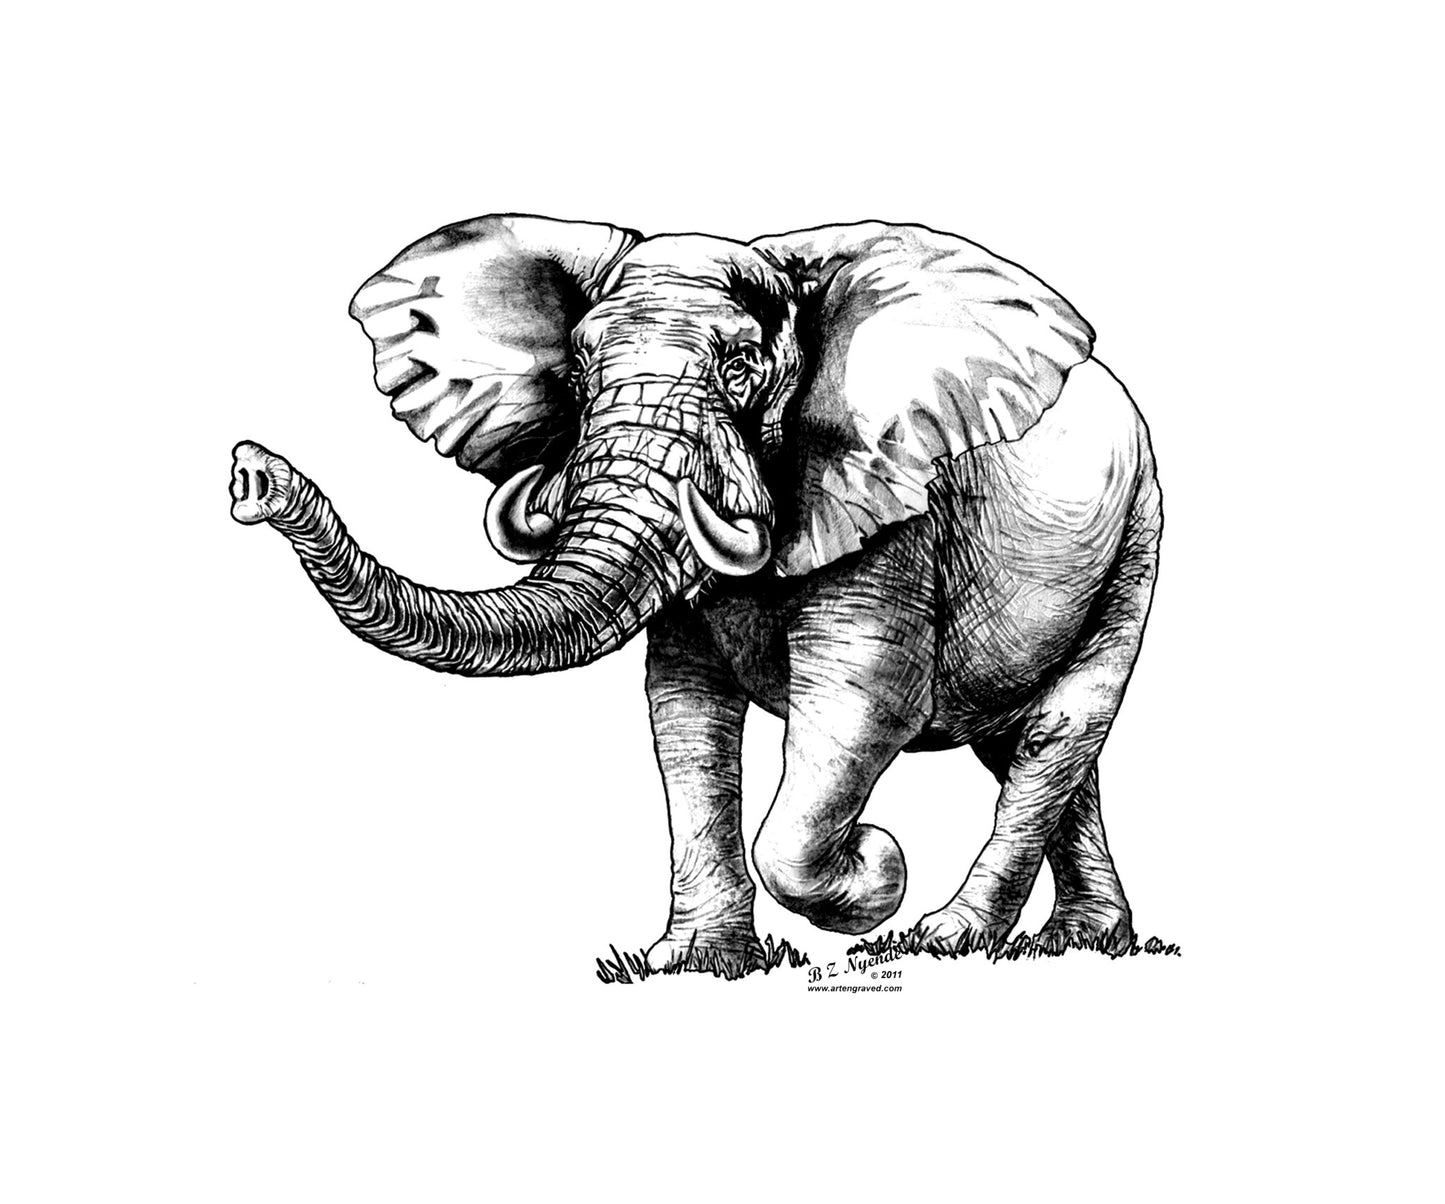 Elephant - Hand Drawn - Available  as Prints or Merch